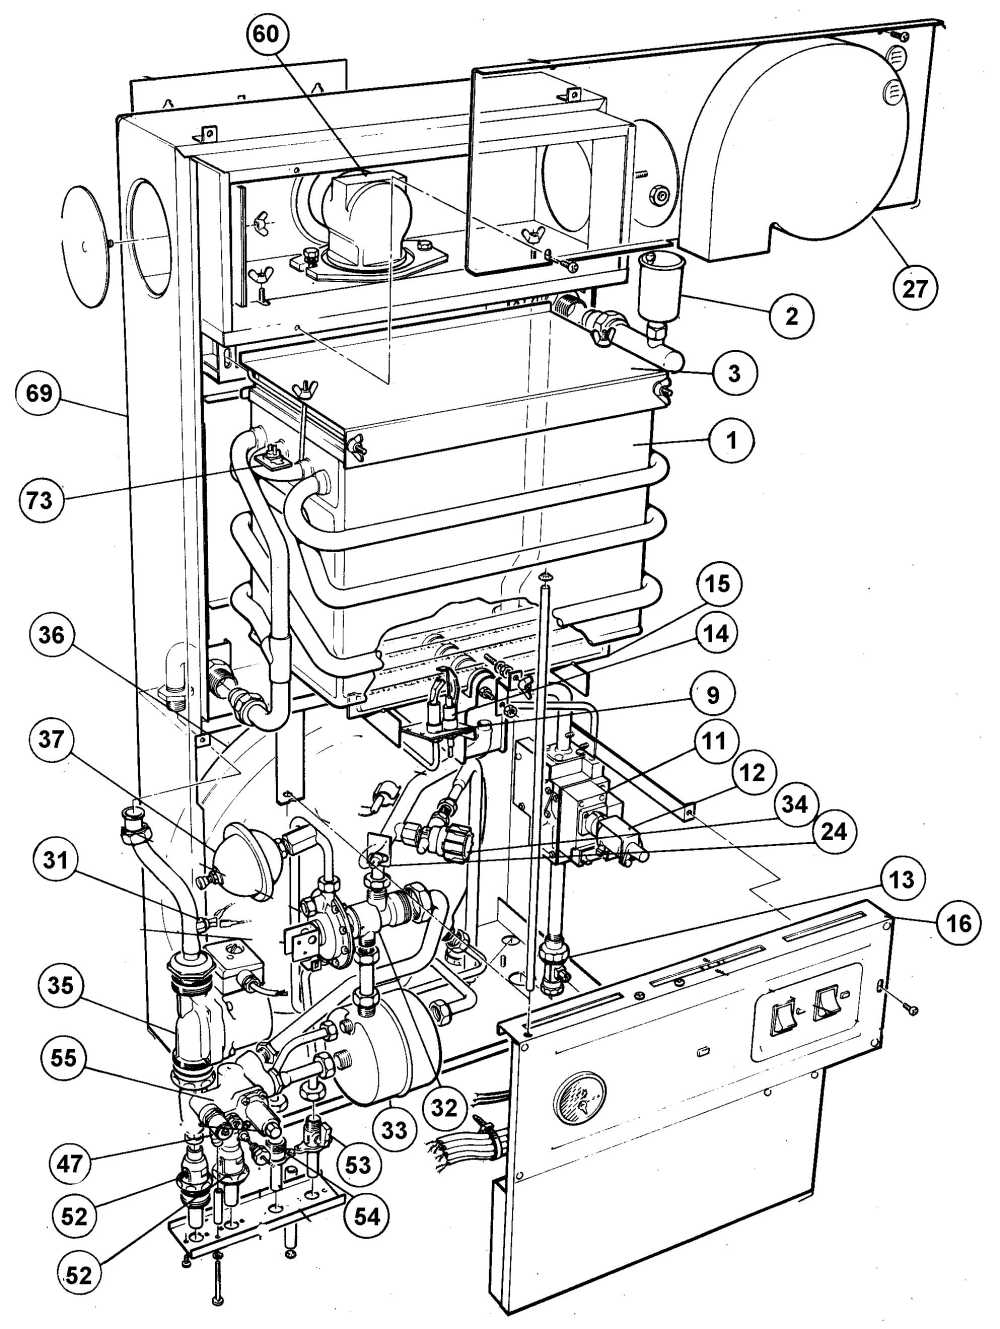 A25/B - Boiler Expanded